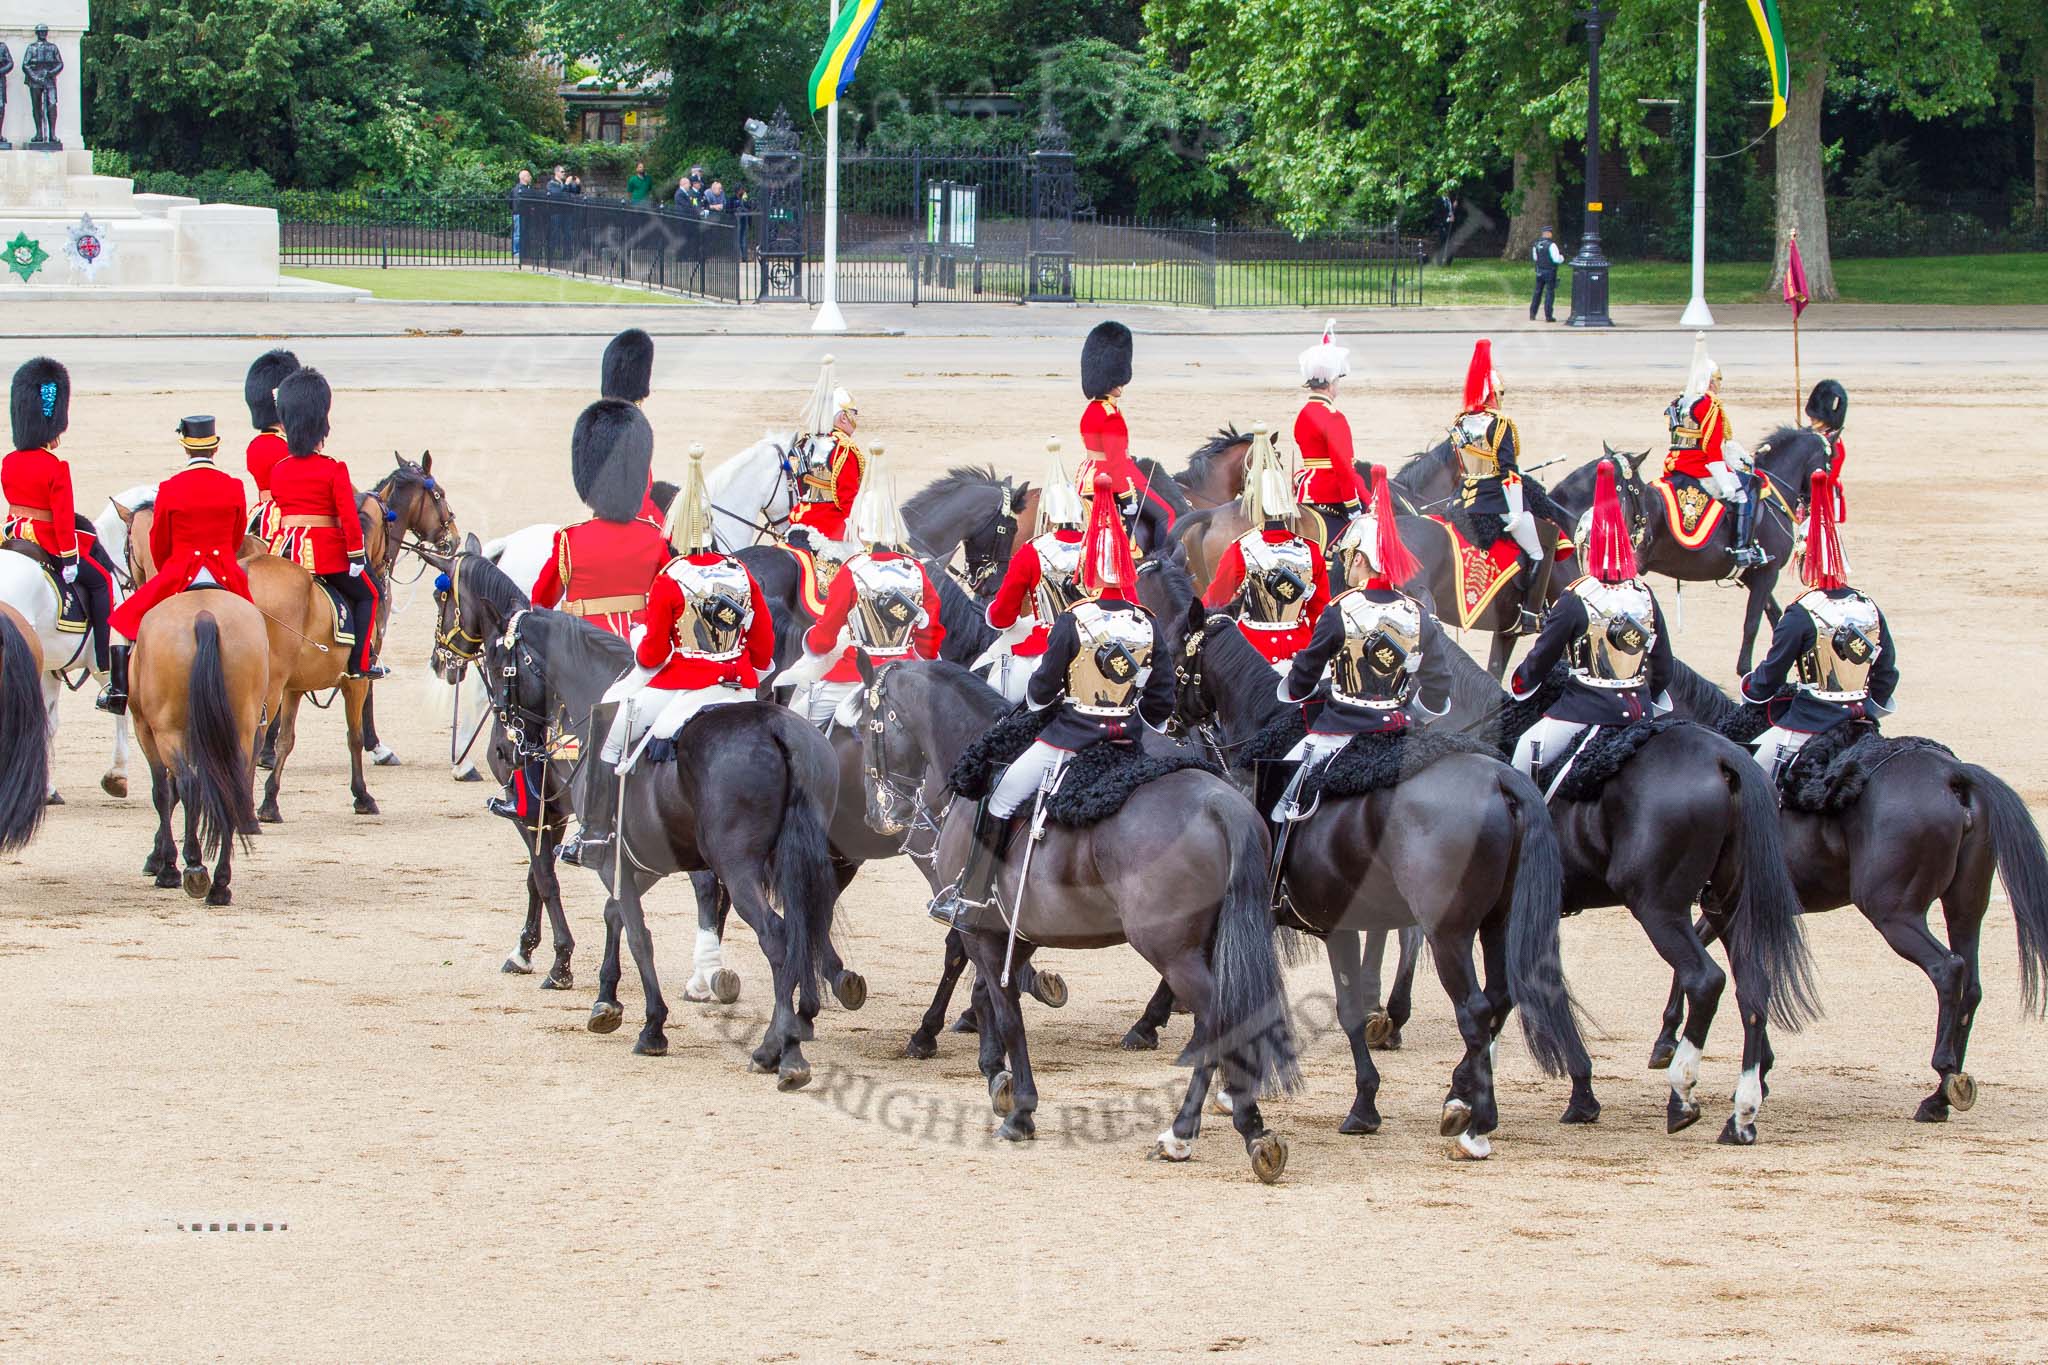 Trooping the Colour 2013: The March Off - the "second half" of the Royal Procession following the guards divisions. Image #856, 15 June 2013 12:13 Horse Guards Parade, London, UK